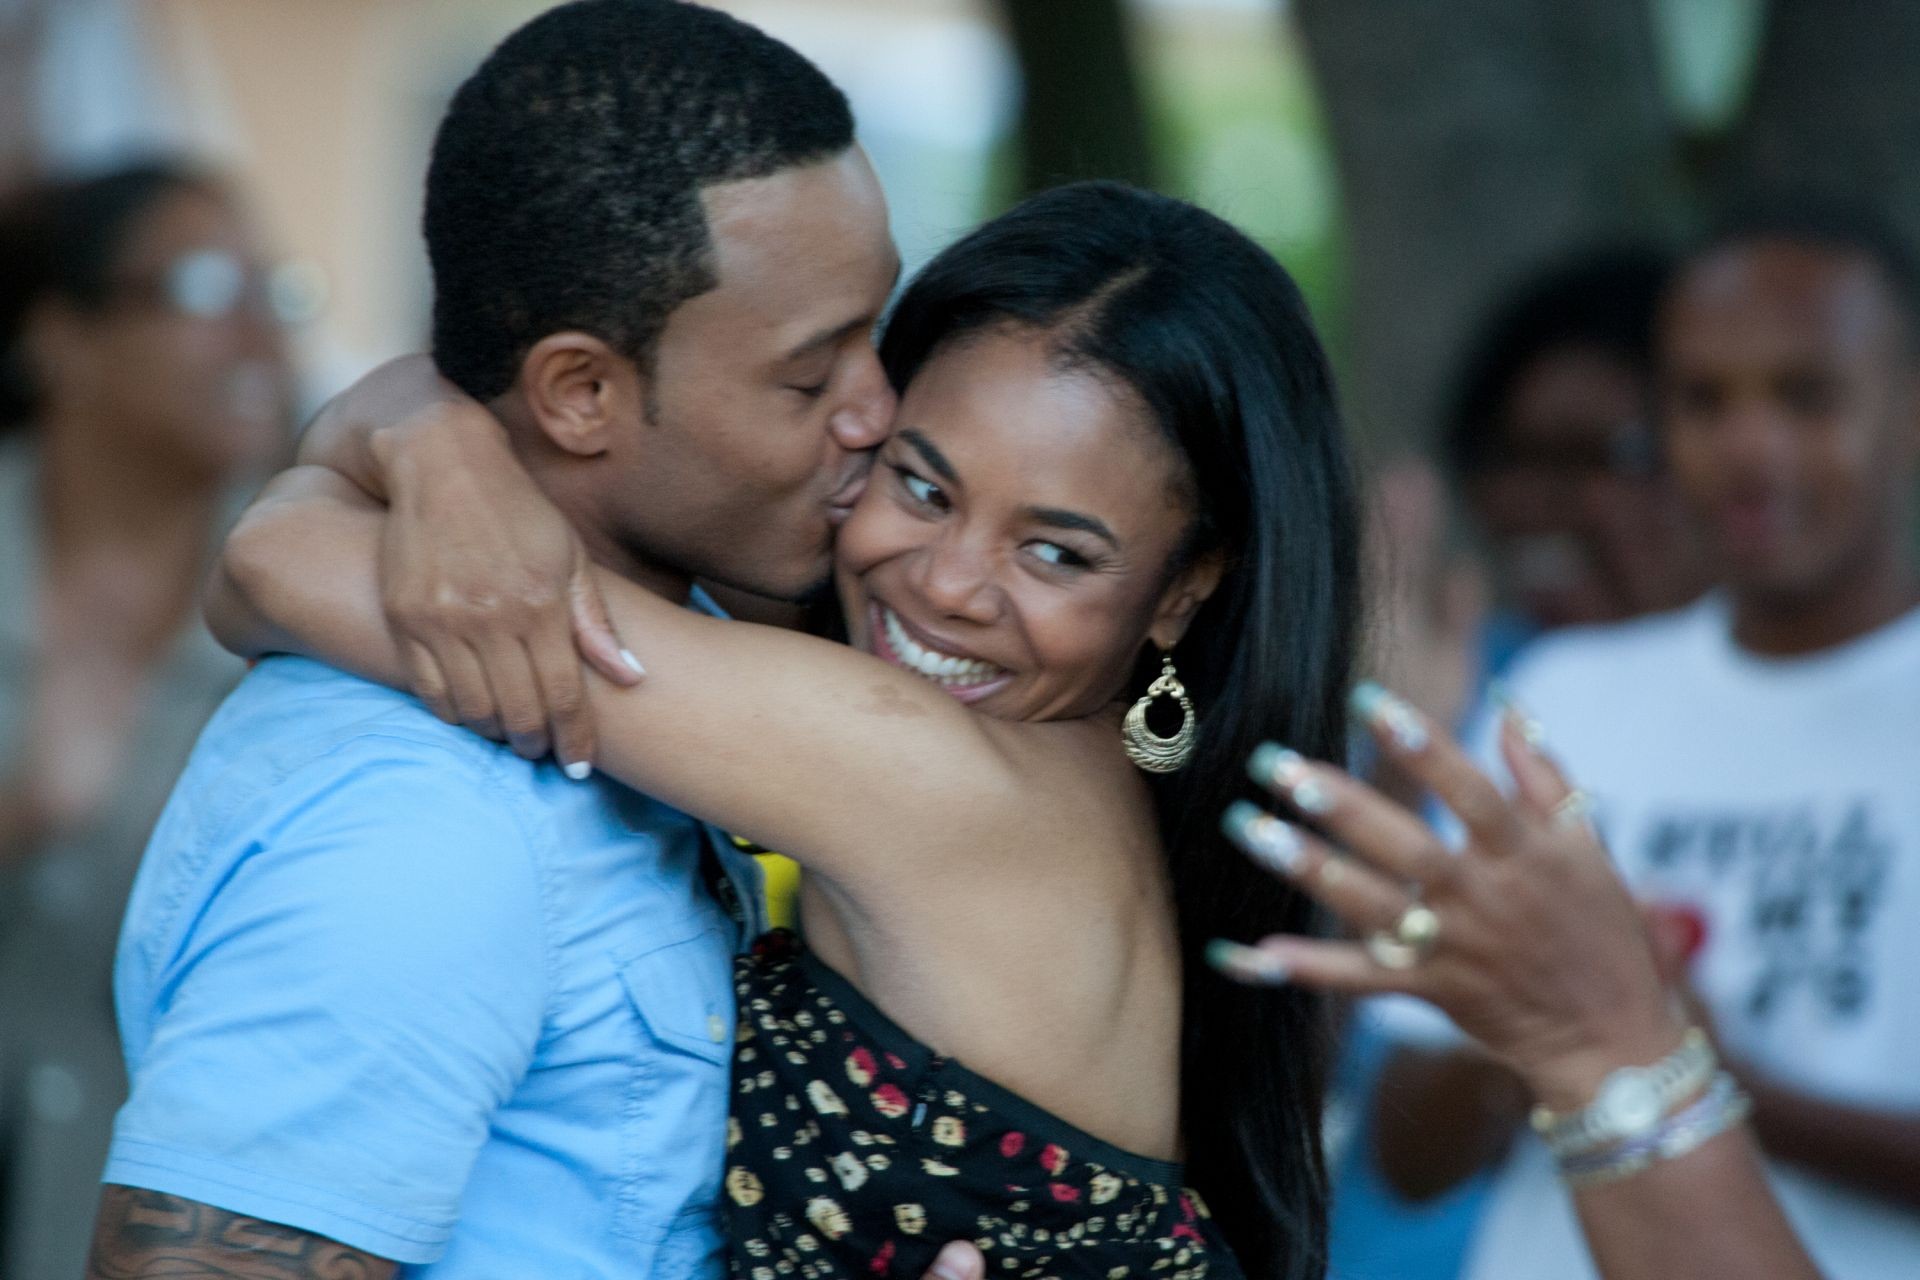 Terrence J stars as Michael and Regina Hall stars as Candace in Screen Gems' Think Like a Man (2012). Photo credit by Alan Markfield.